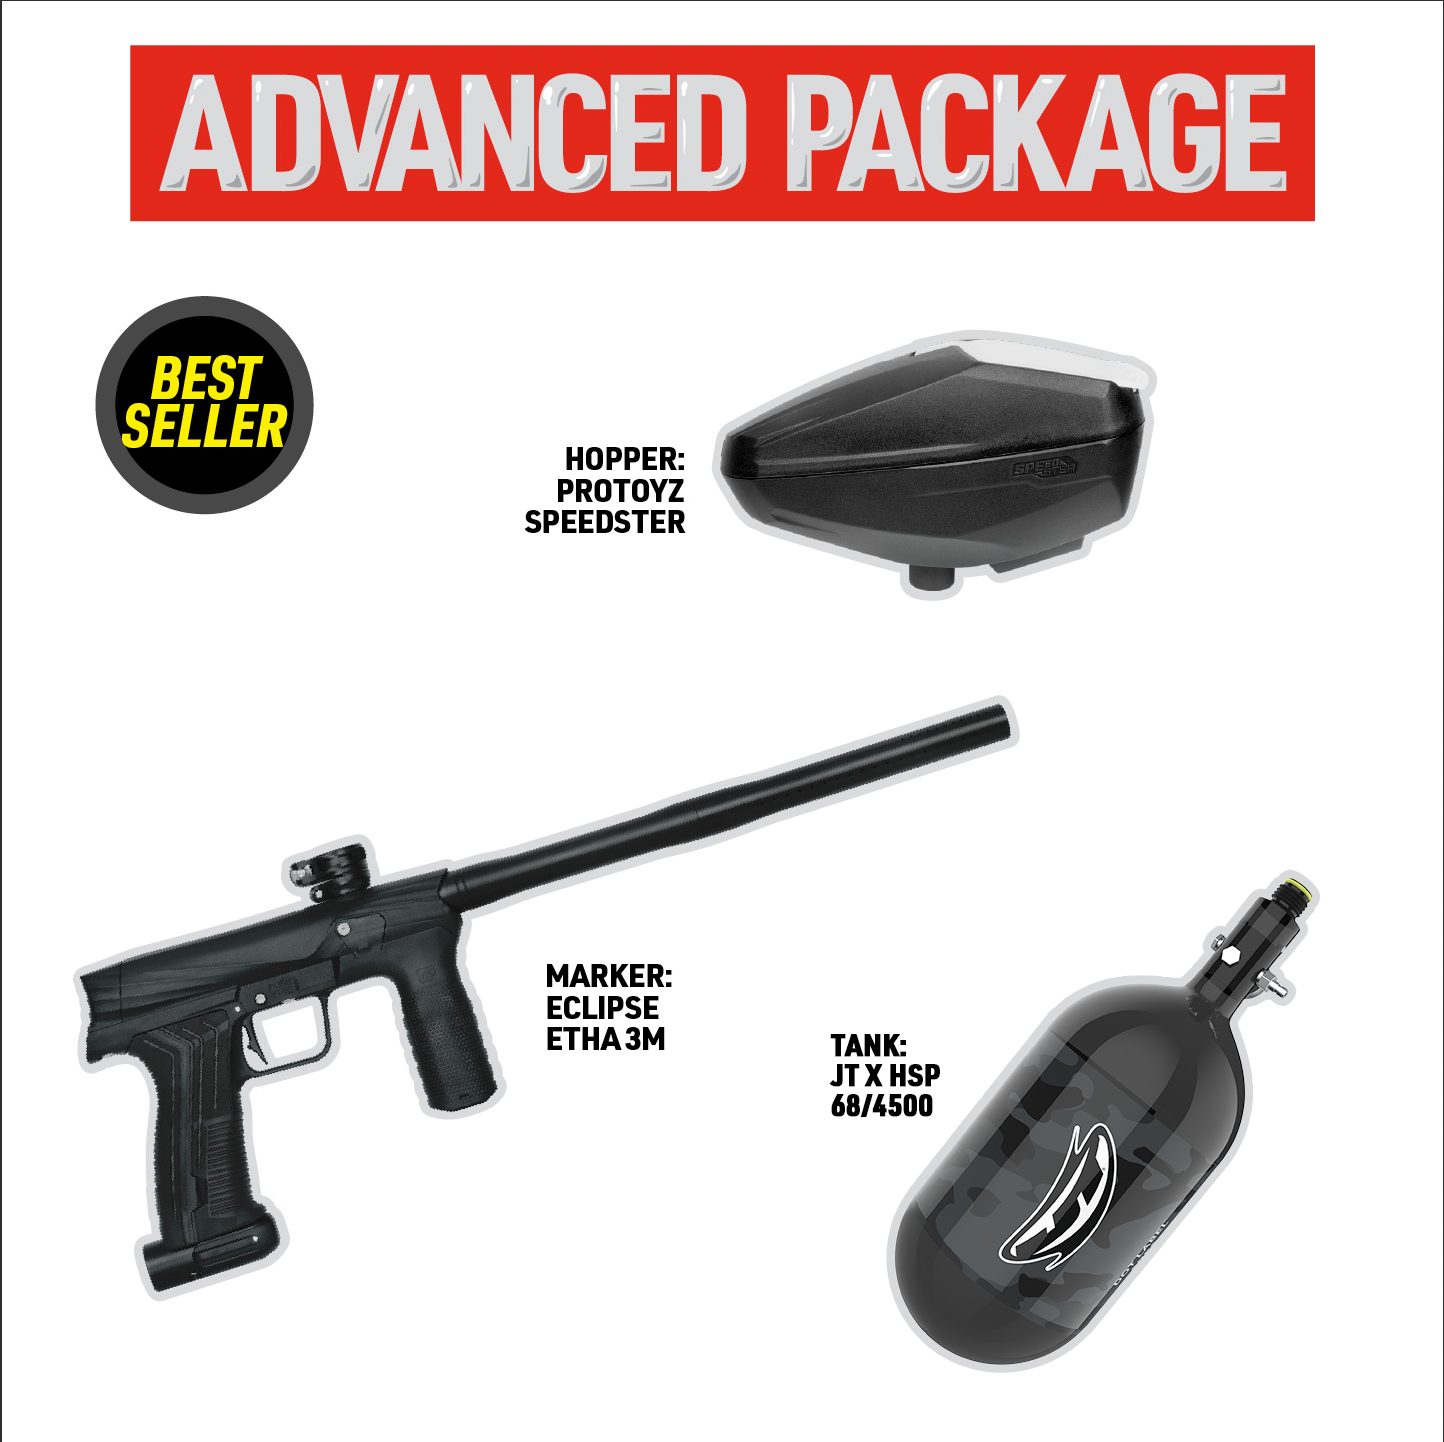 Advanced Package - Eclipse Etha 3M